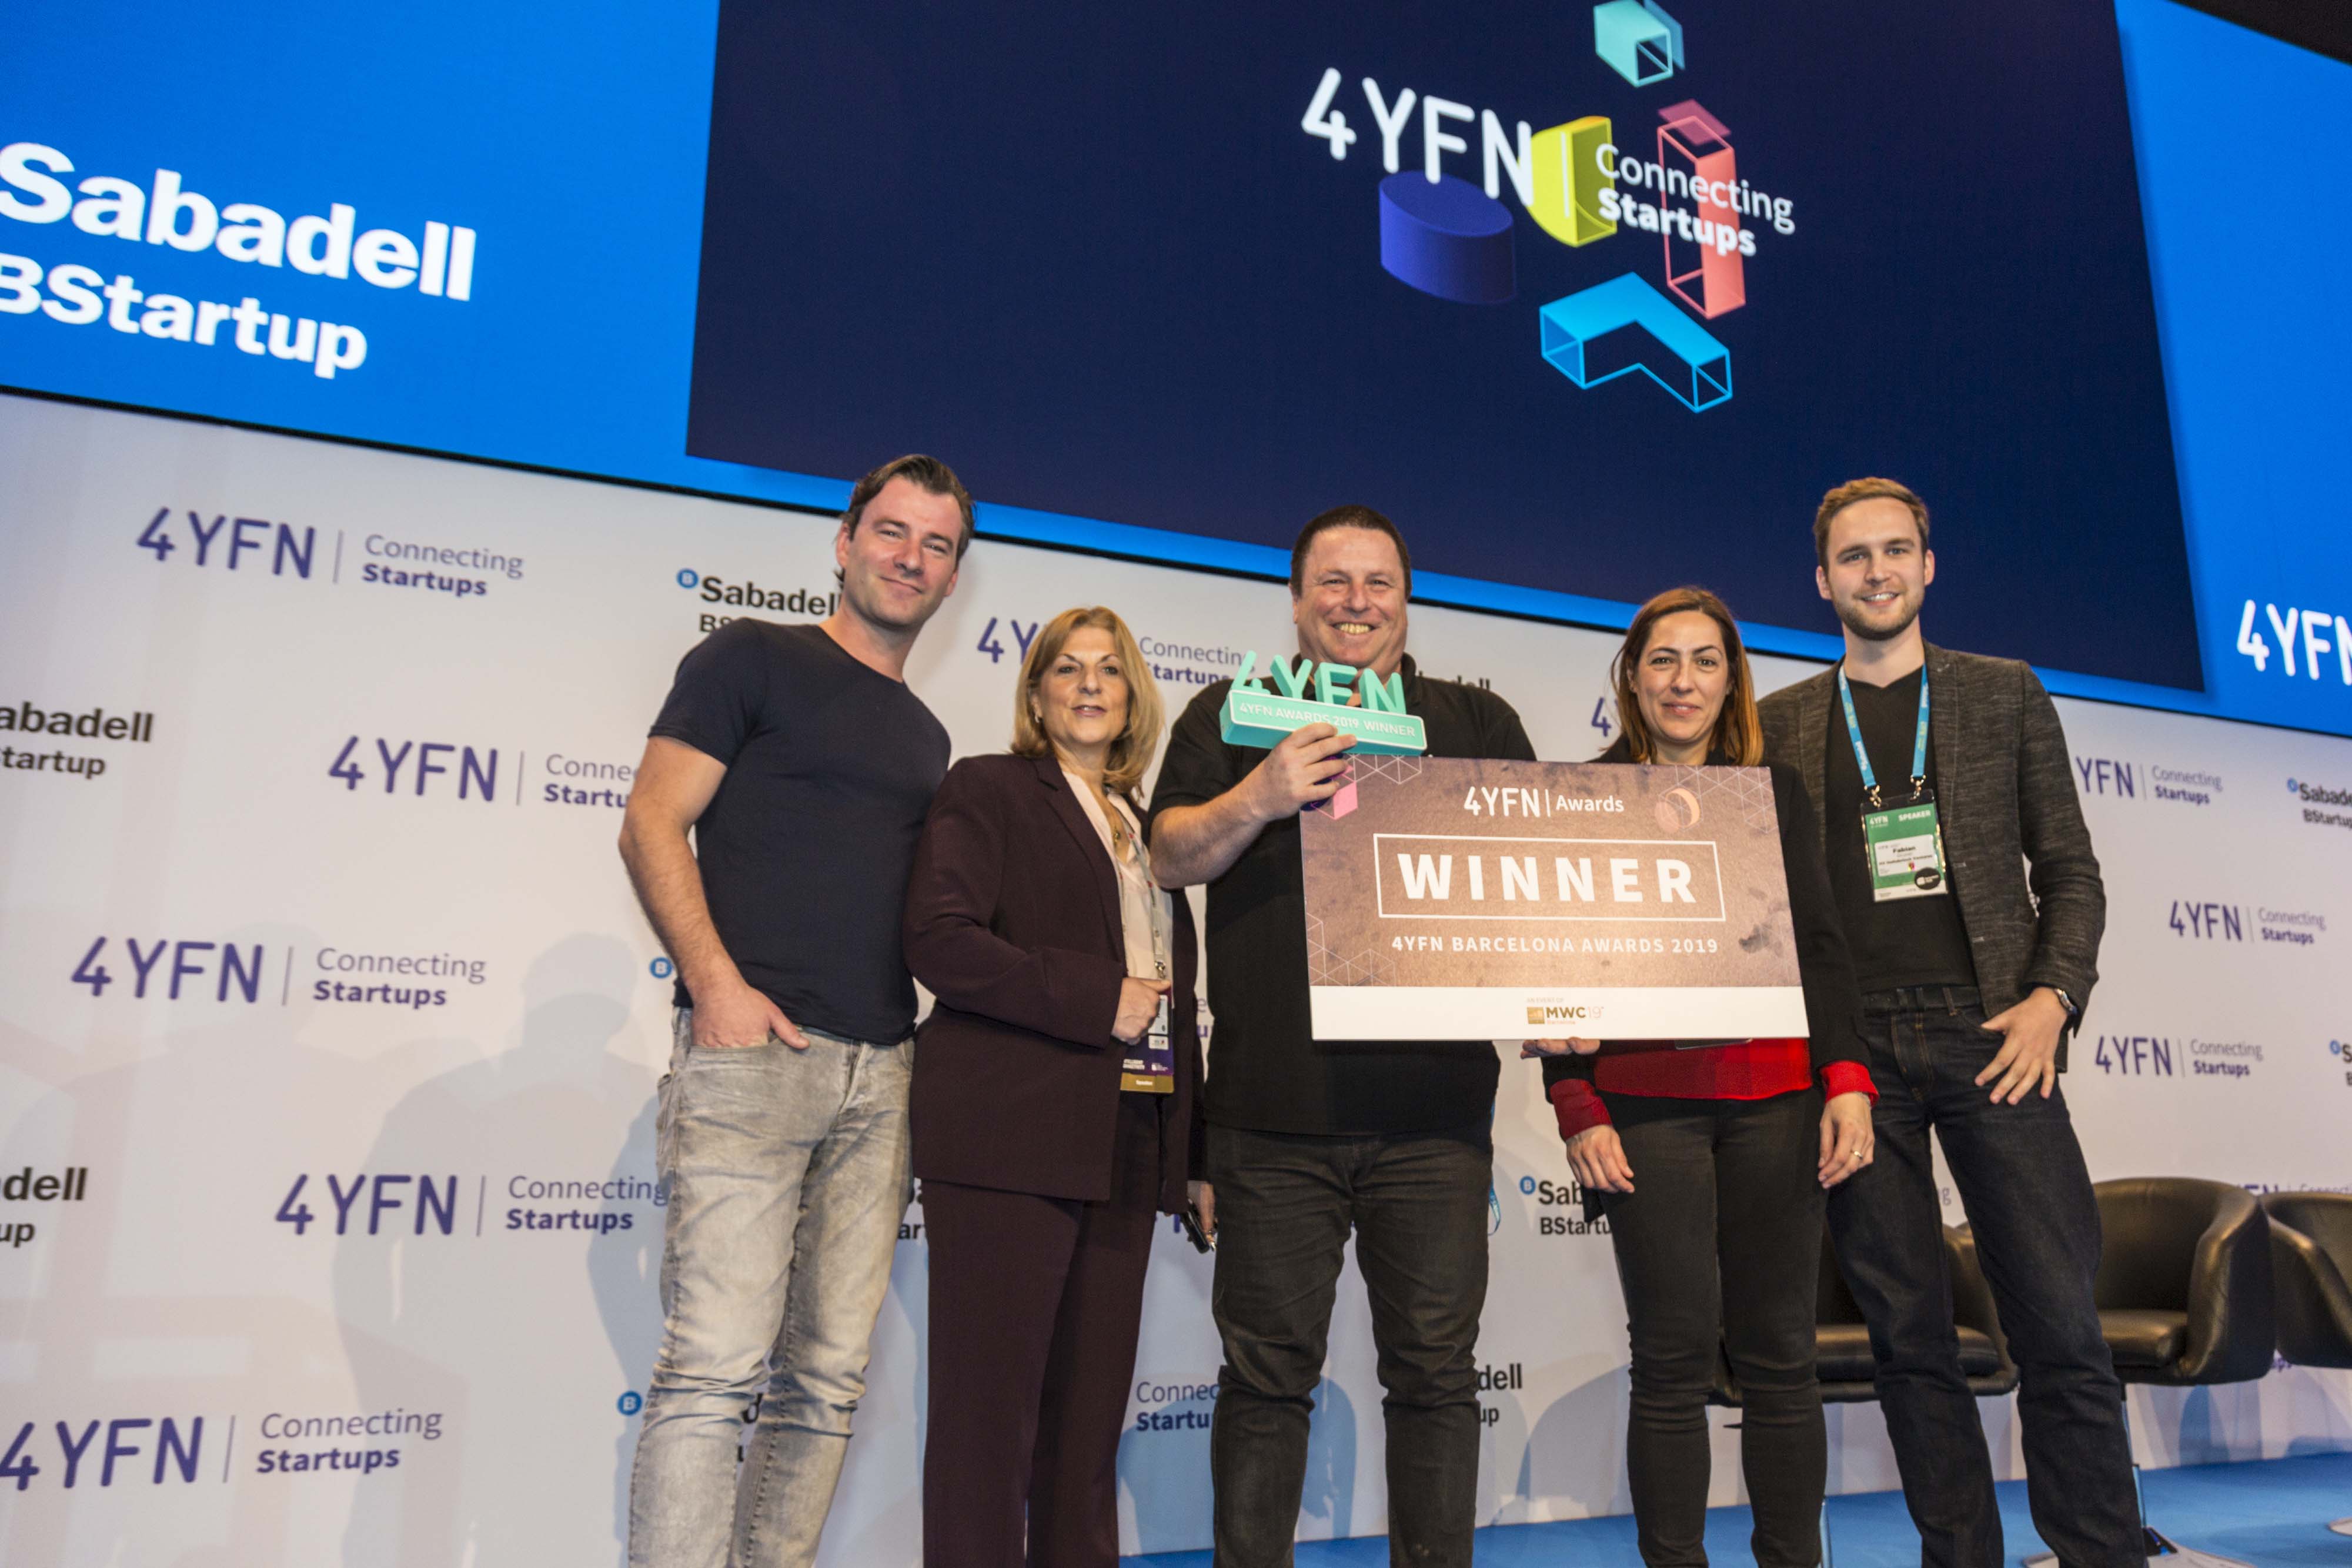 military drone jammer tools - IoT Device Security Startup NanoLock Wins GSMA’s 4YFN Competition